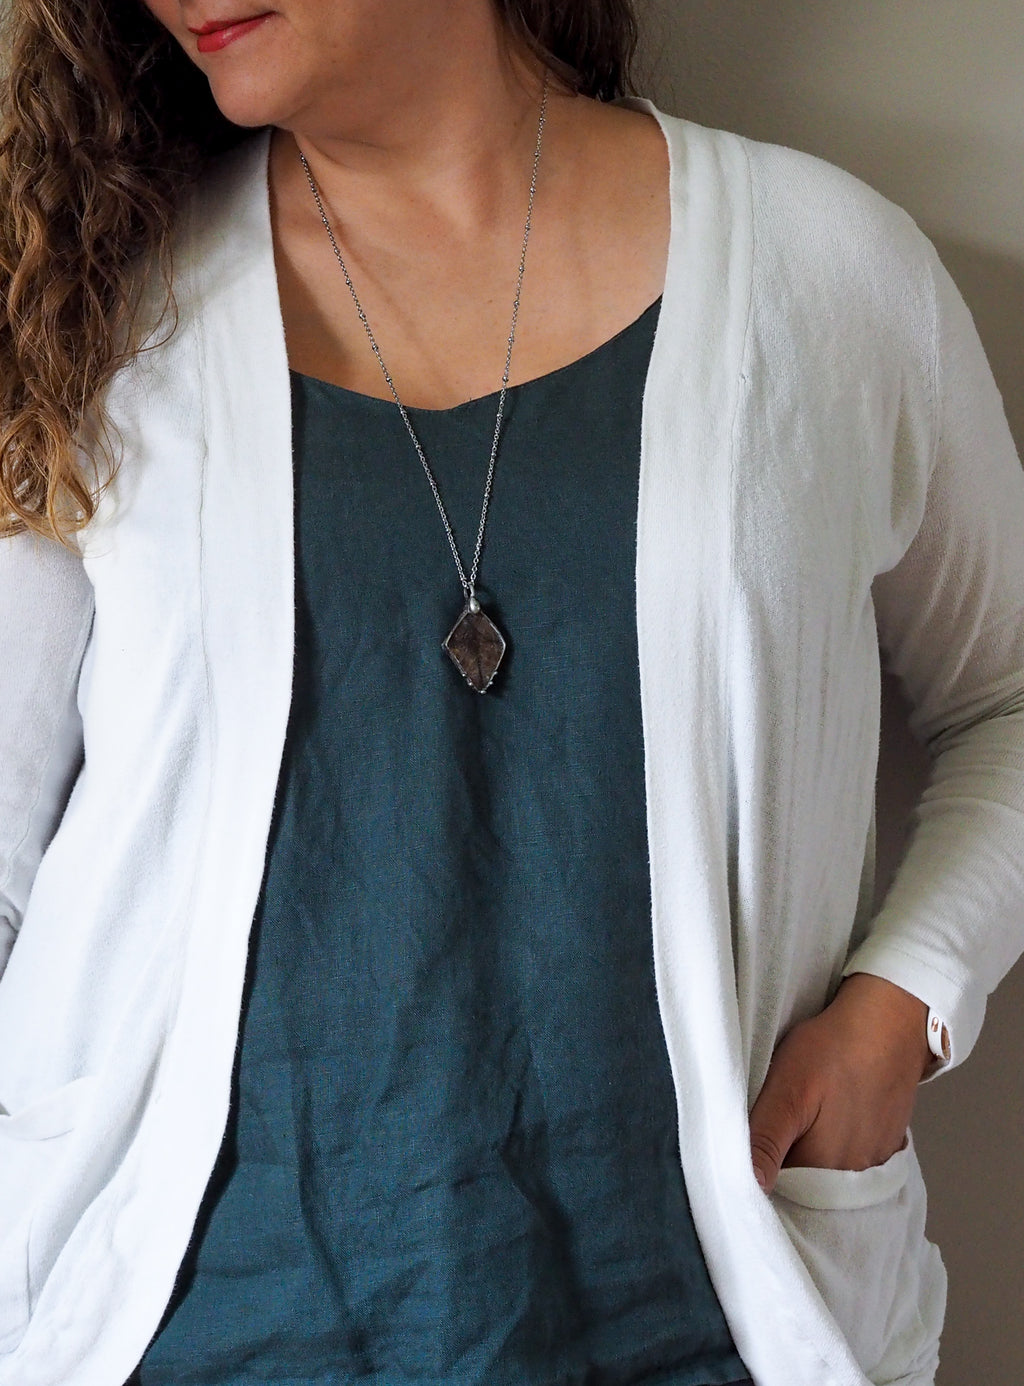 brown crystal talisman necklace on woman in blue top